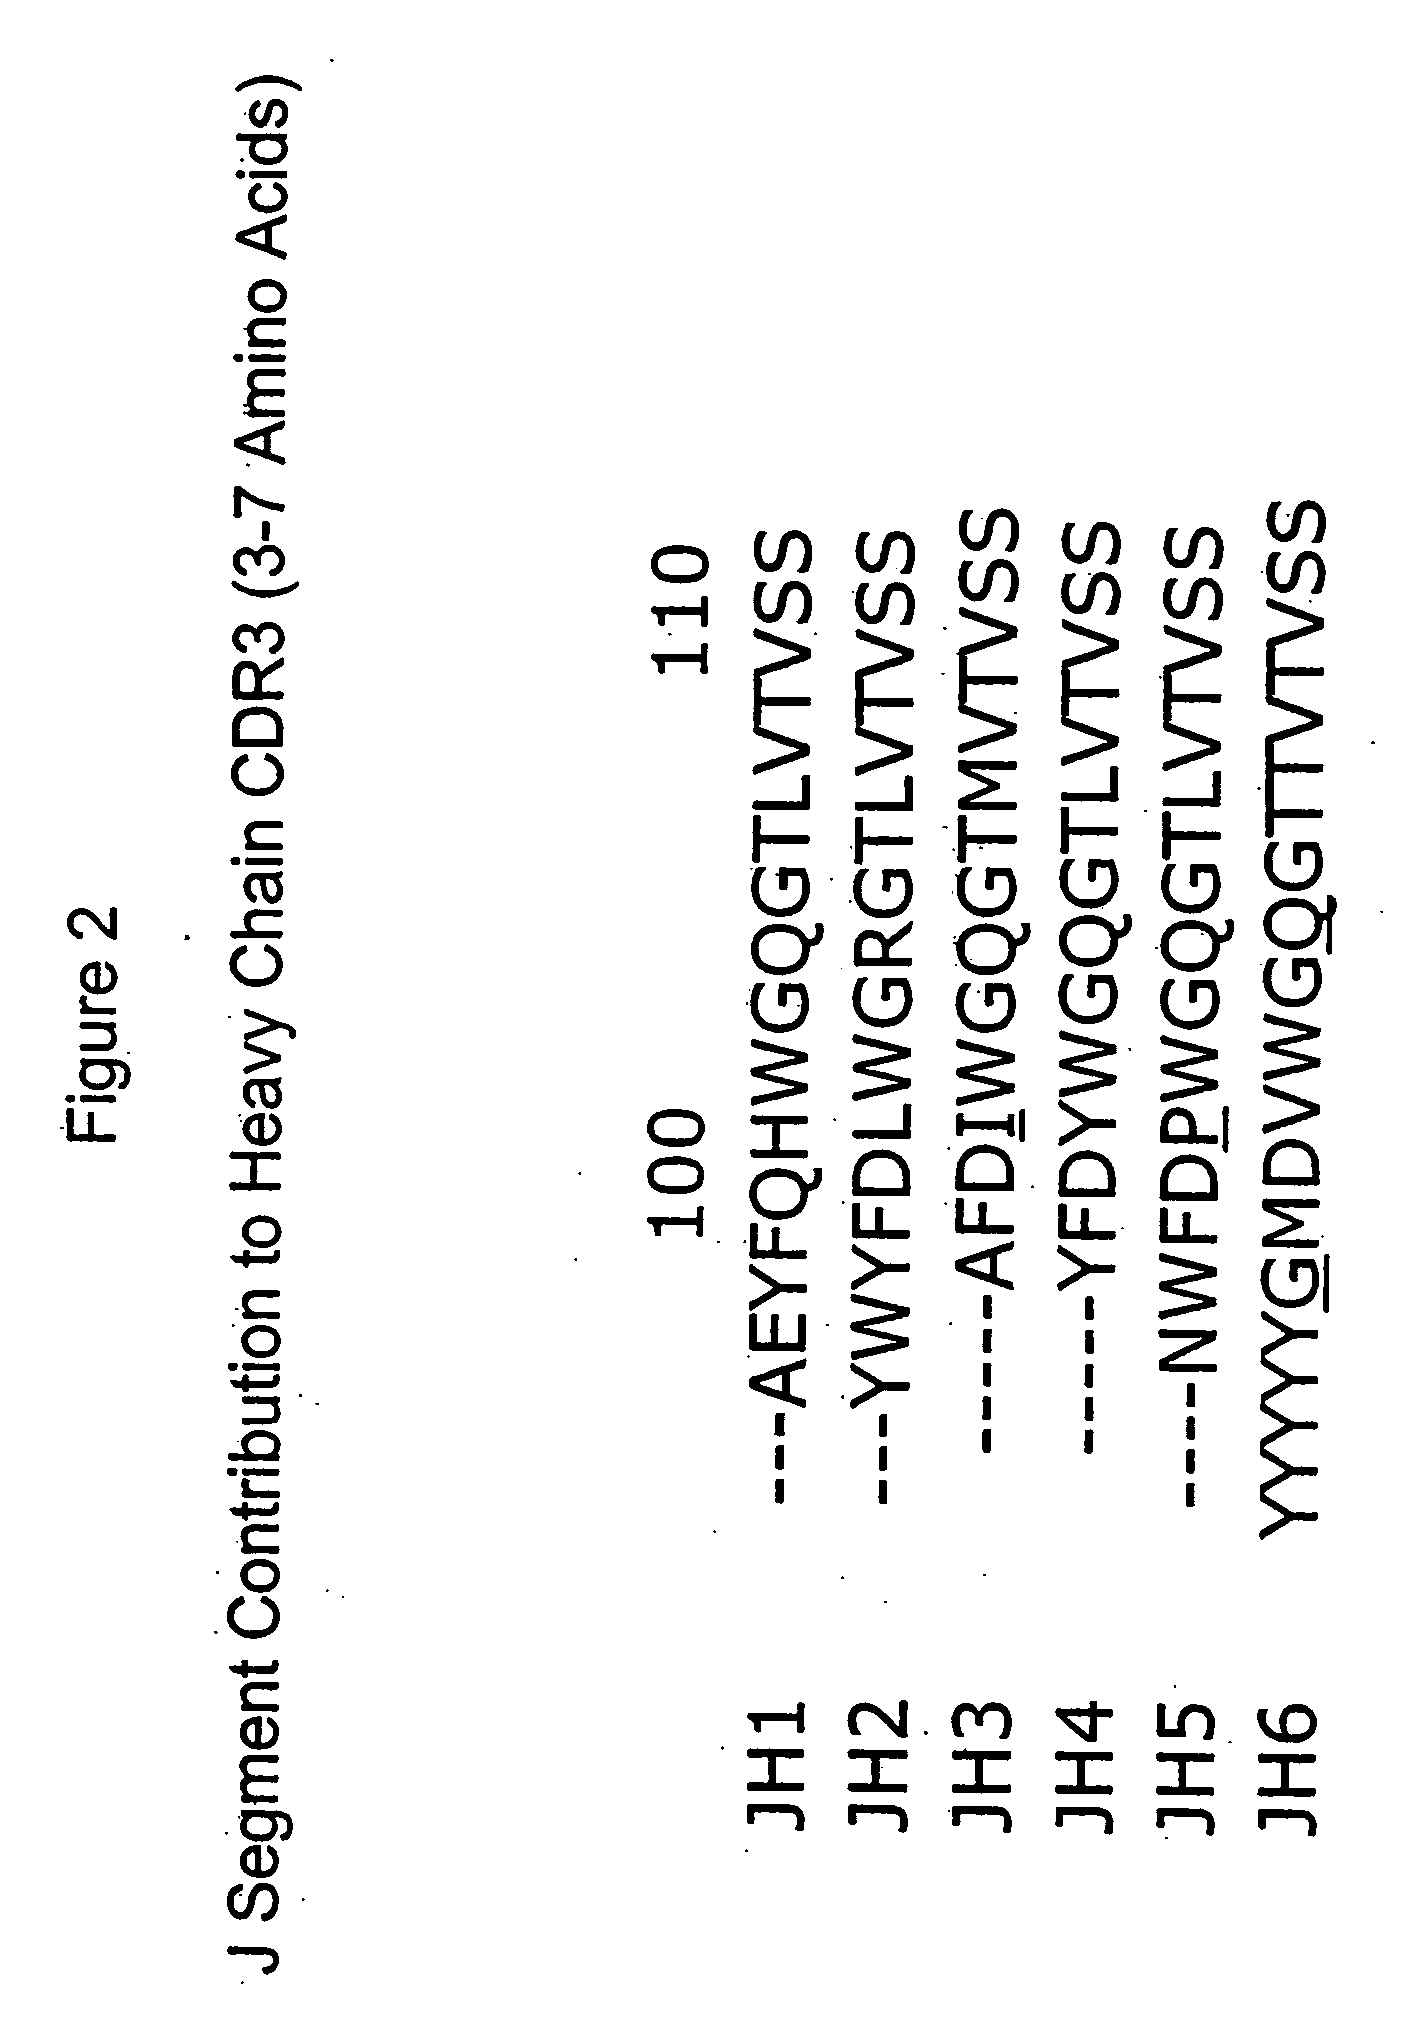 Immunoglobulin-like variable chain binding polypeptides and methods of use